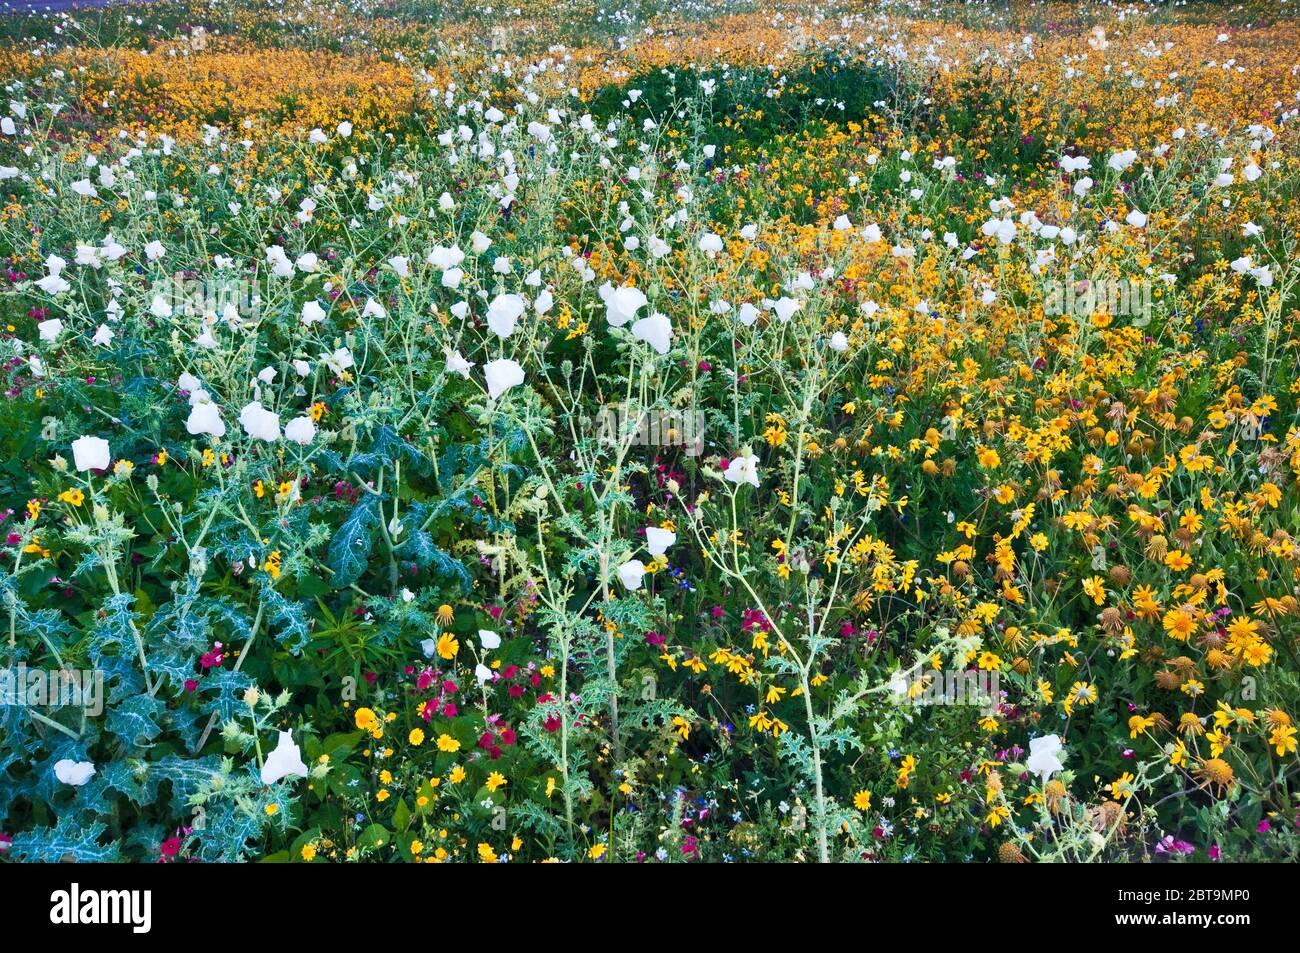 White prickly poppies and sunflowers dominate field of wildflowers at roadside in springtime, Goliad State Park, near Goliad, Texas, USA Stock Photo